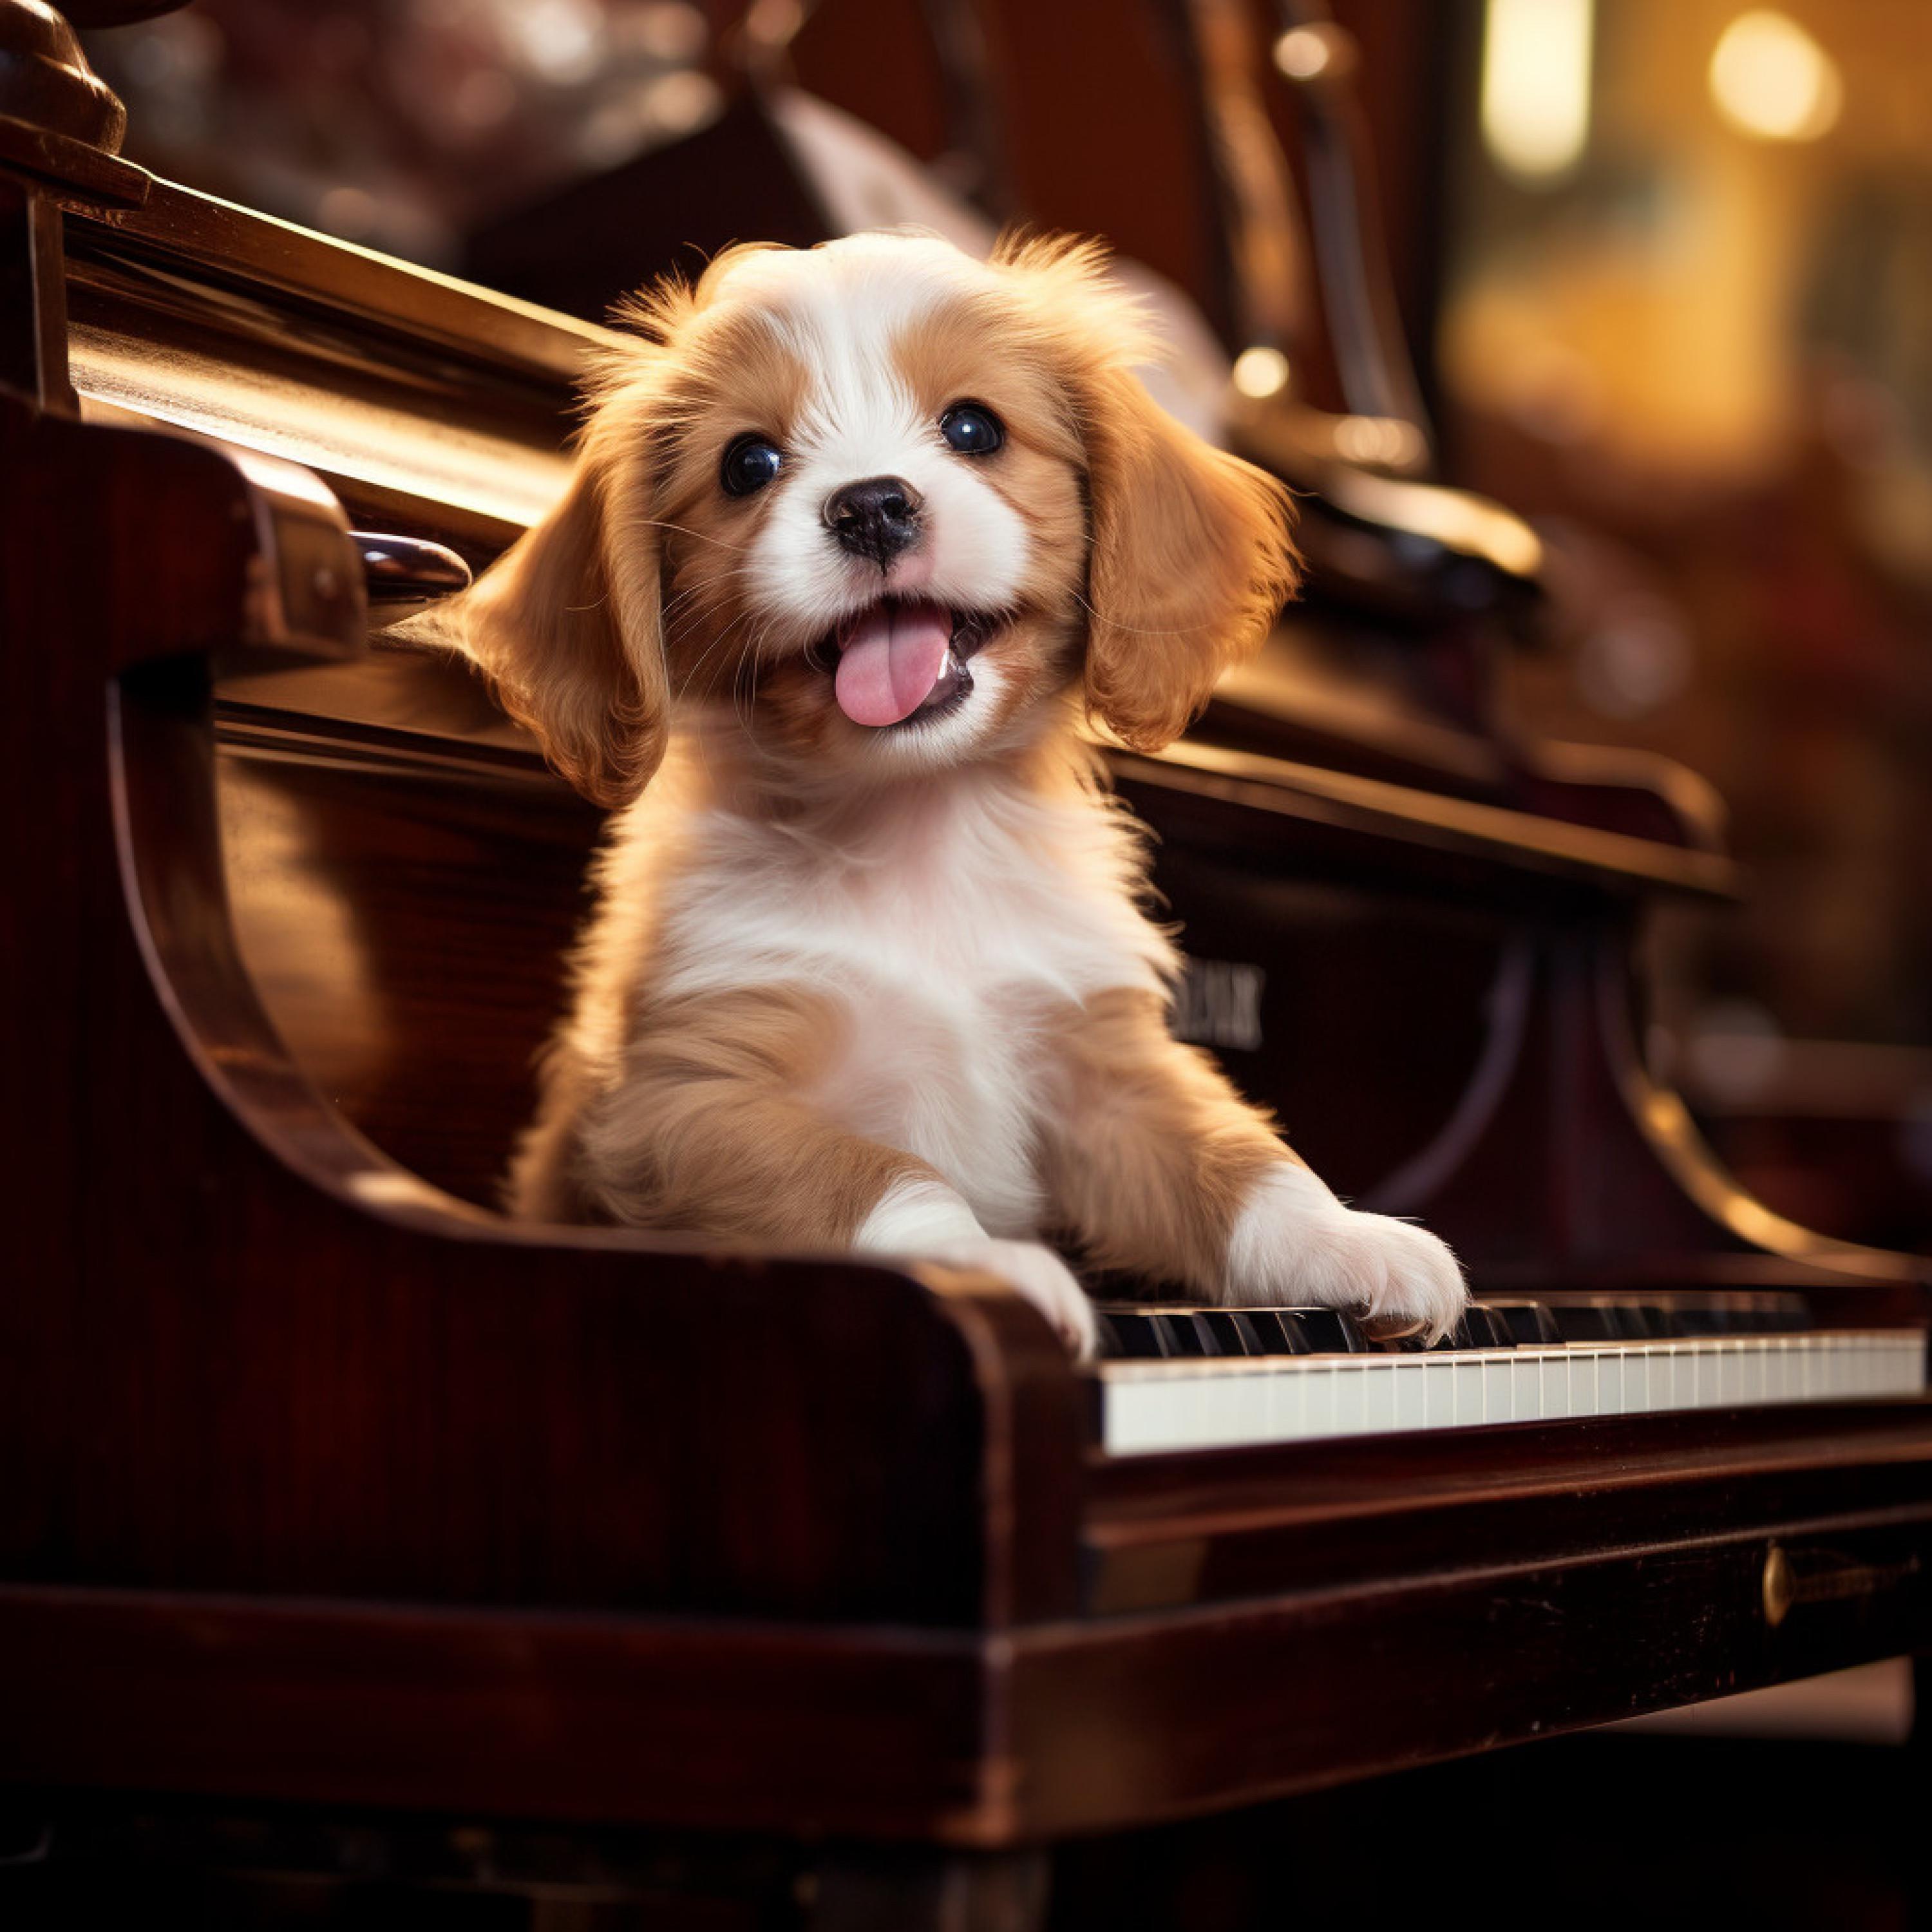 Relaxmydog - Dogs Piano Playful Romp